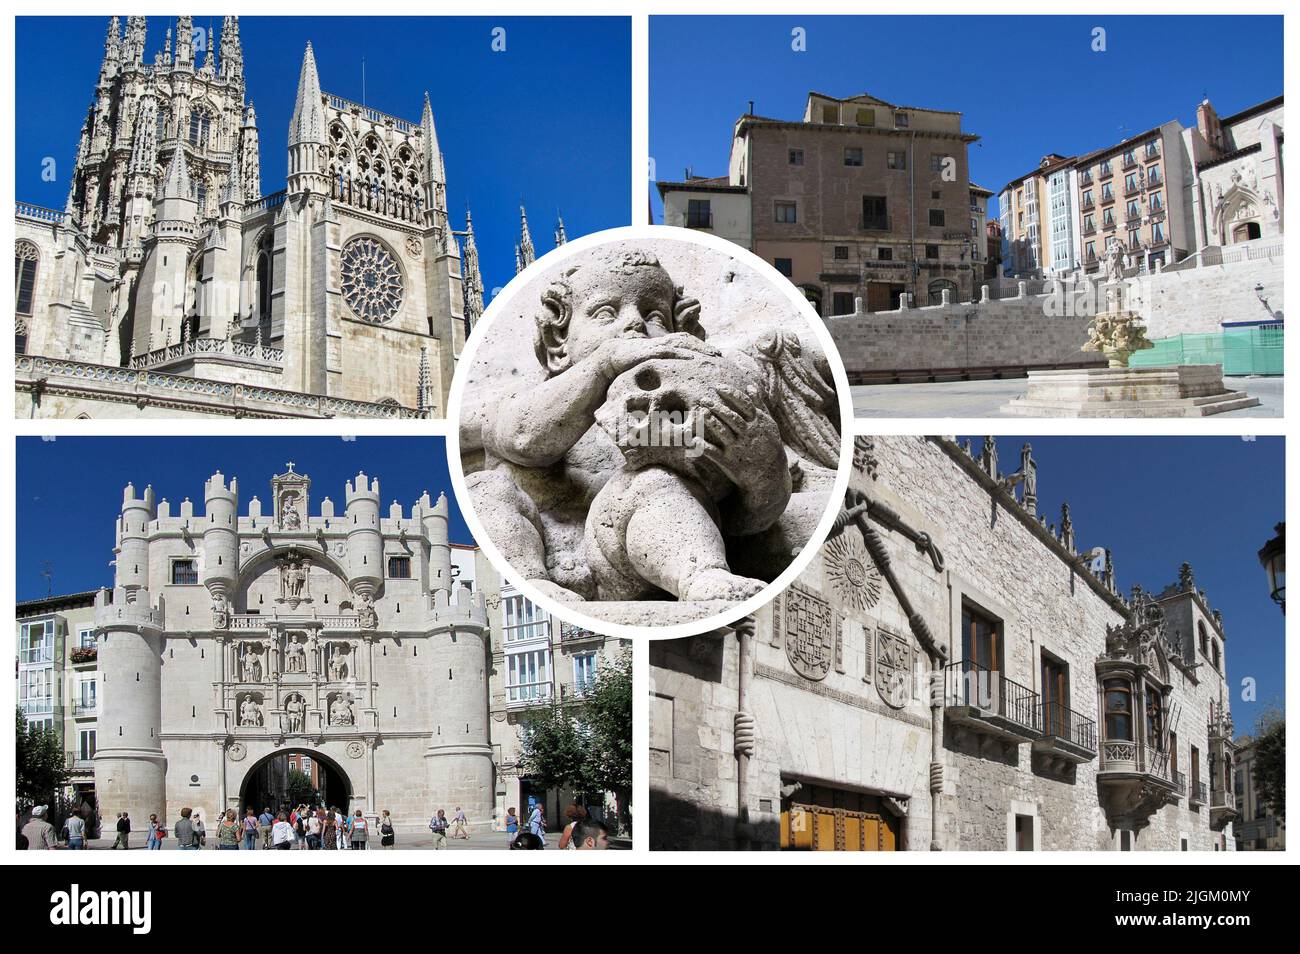 Burgos, provincial capital of the autonomous community of Castile and León, Spain, is characterized by a perfectly preserved medieval architecture. Stock Photo